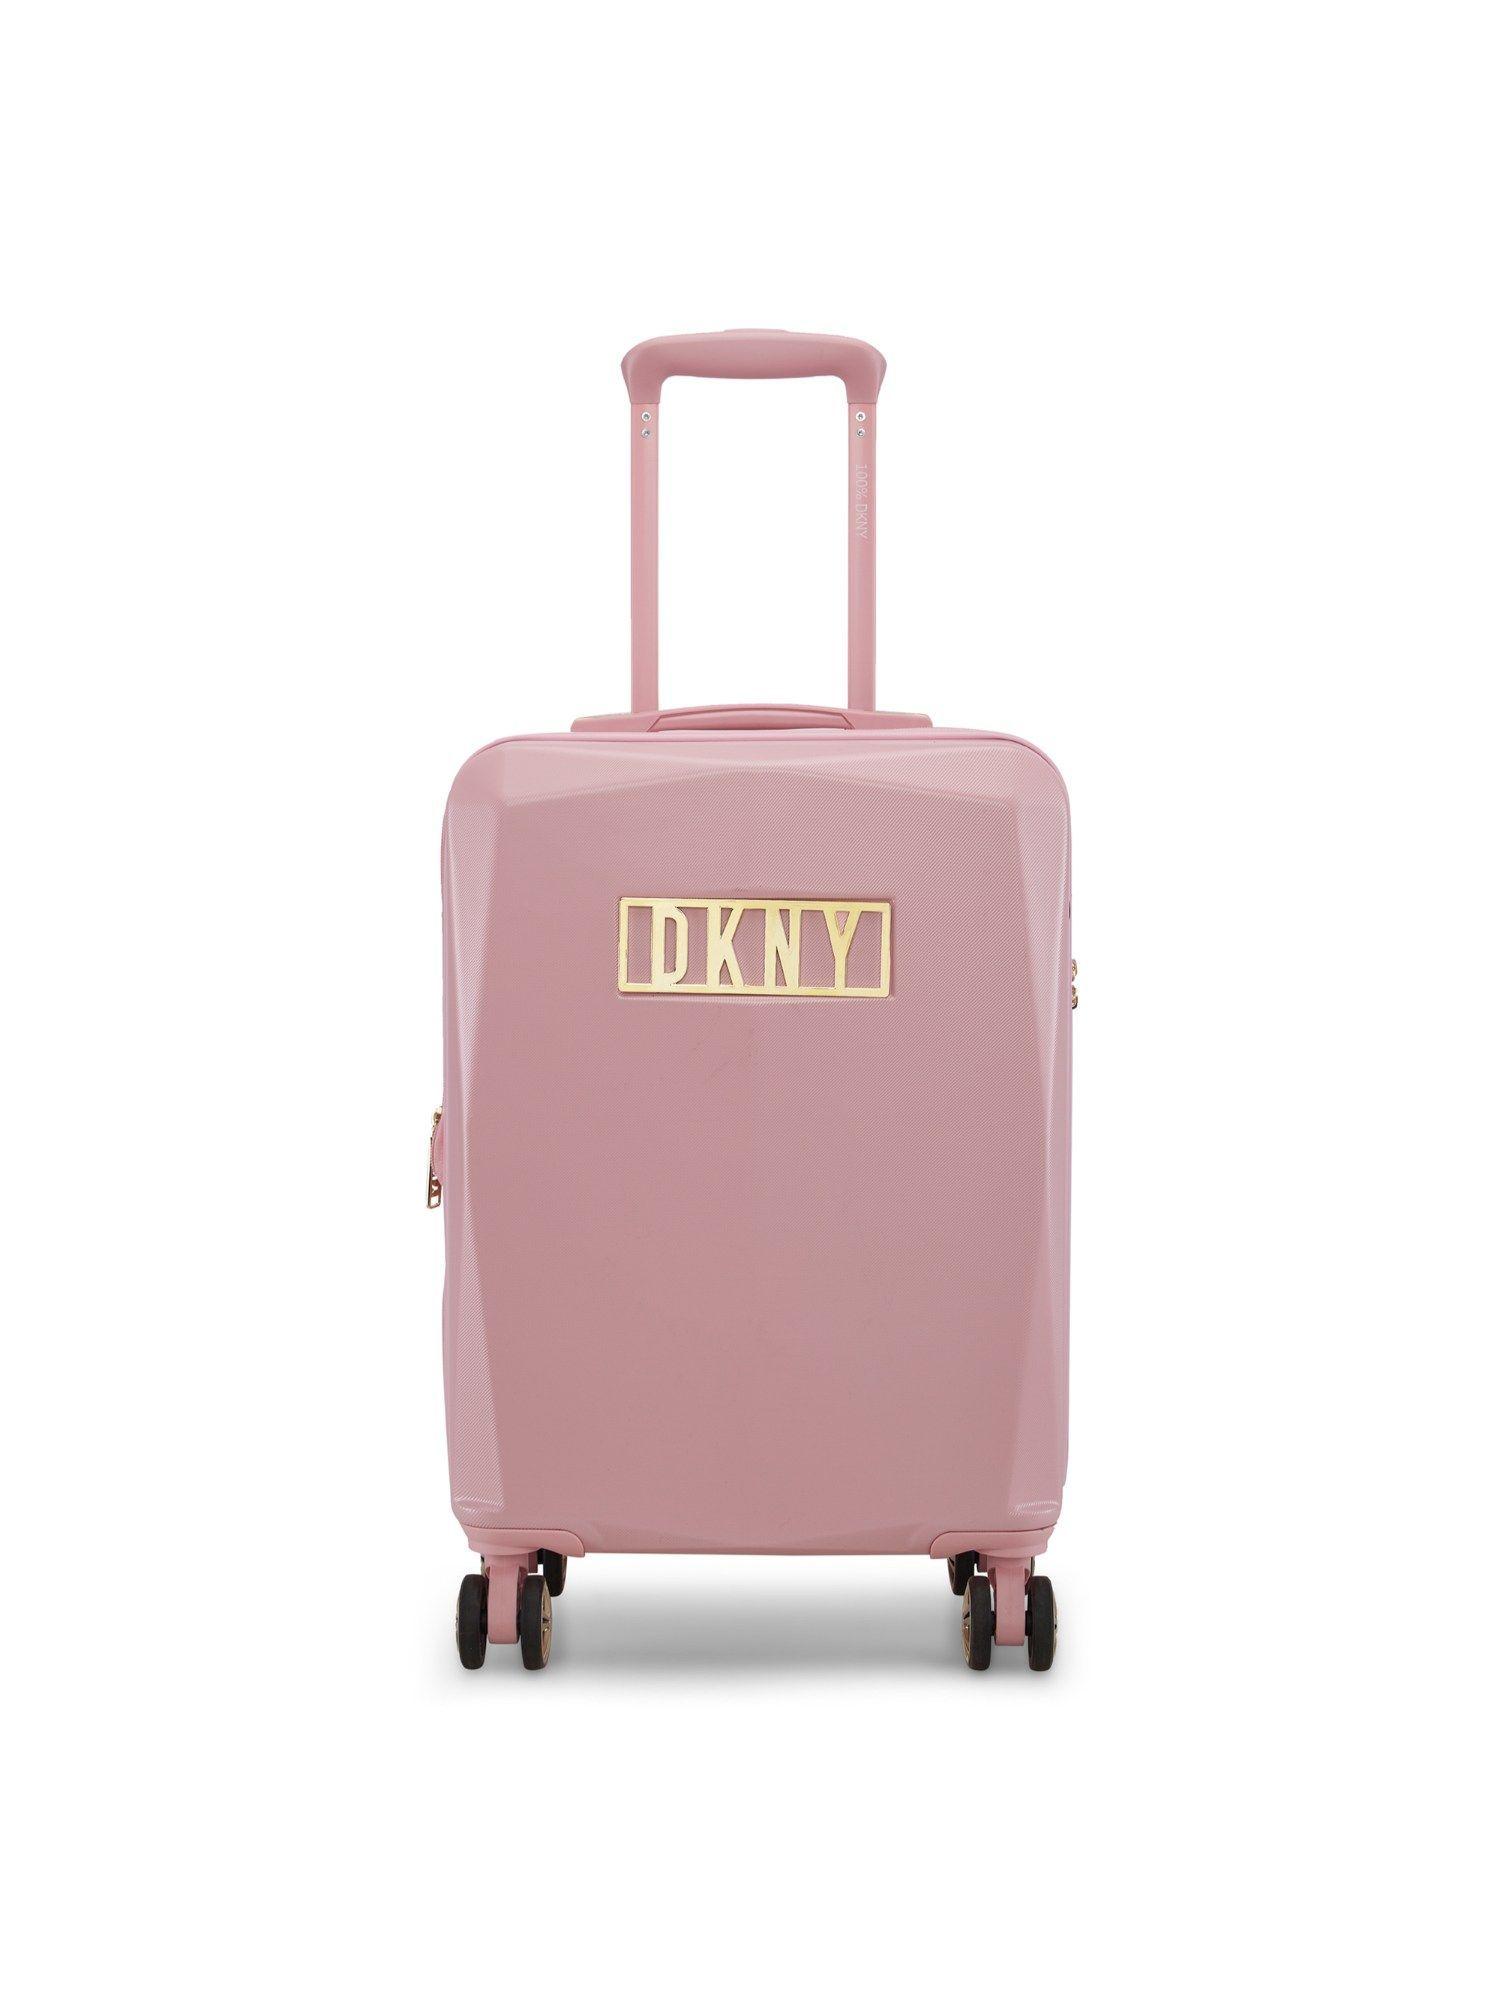 what a gem rose dust colour abs hard cabin 20" luggage with pouch